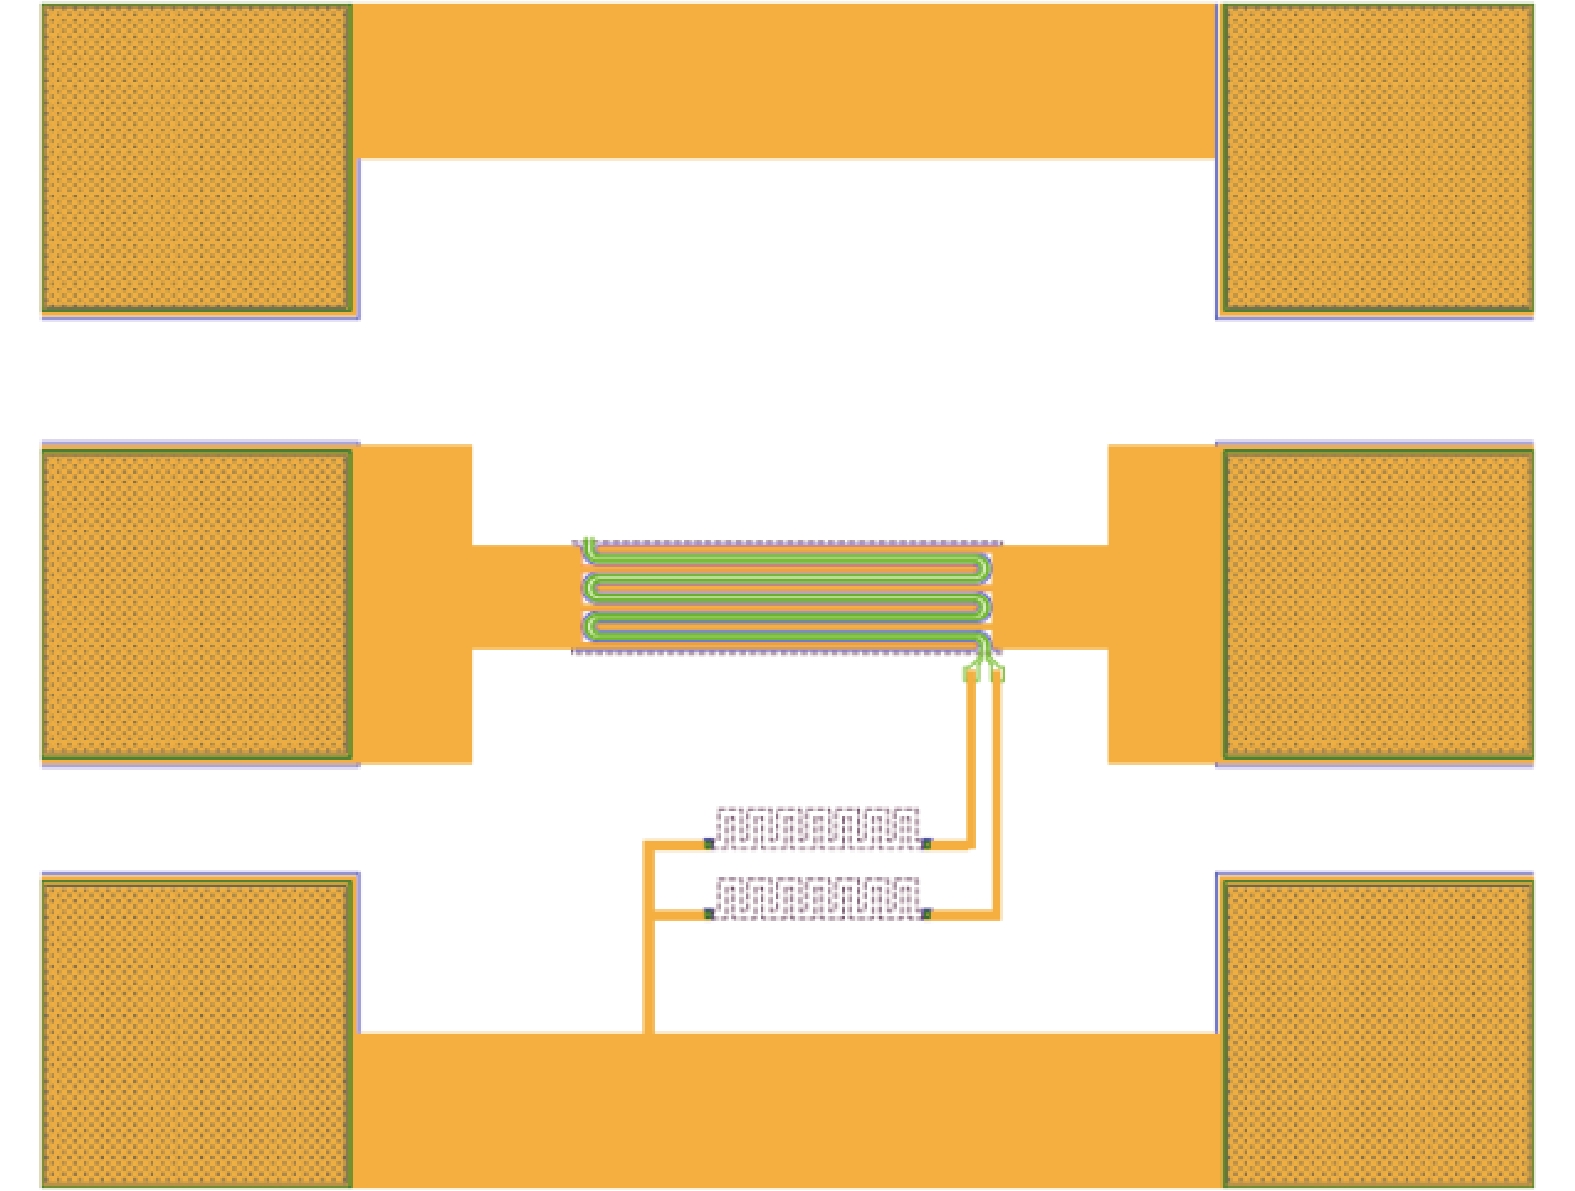 (Color online) Layout of the dual-gate GaAs pHEMT switch(125 μm × 5).